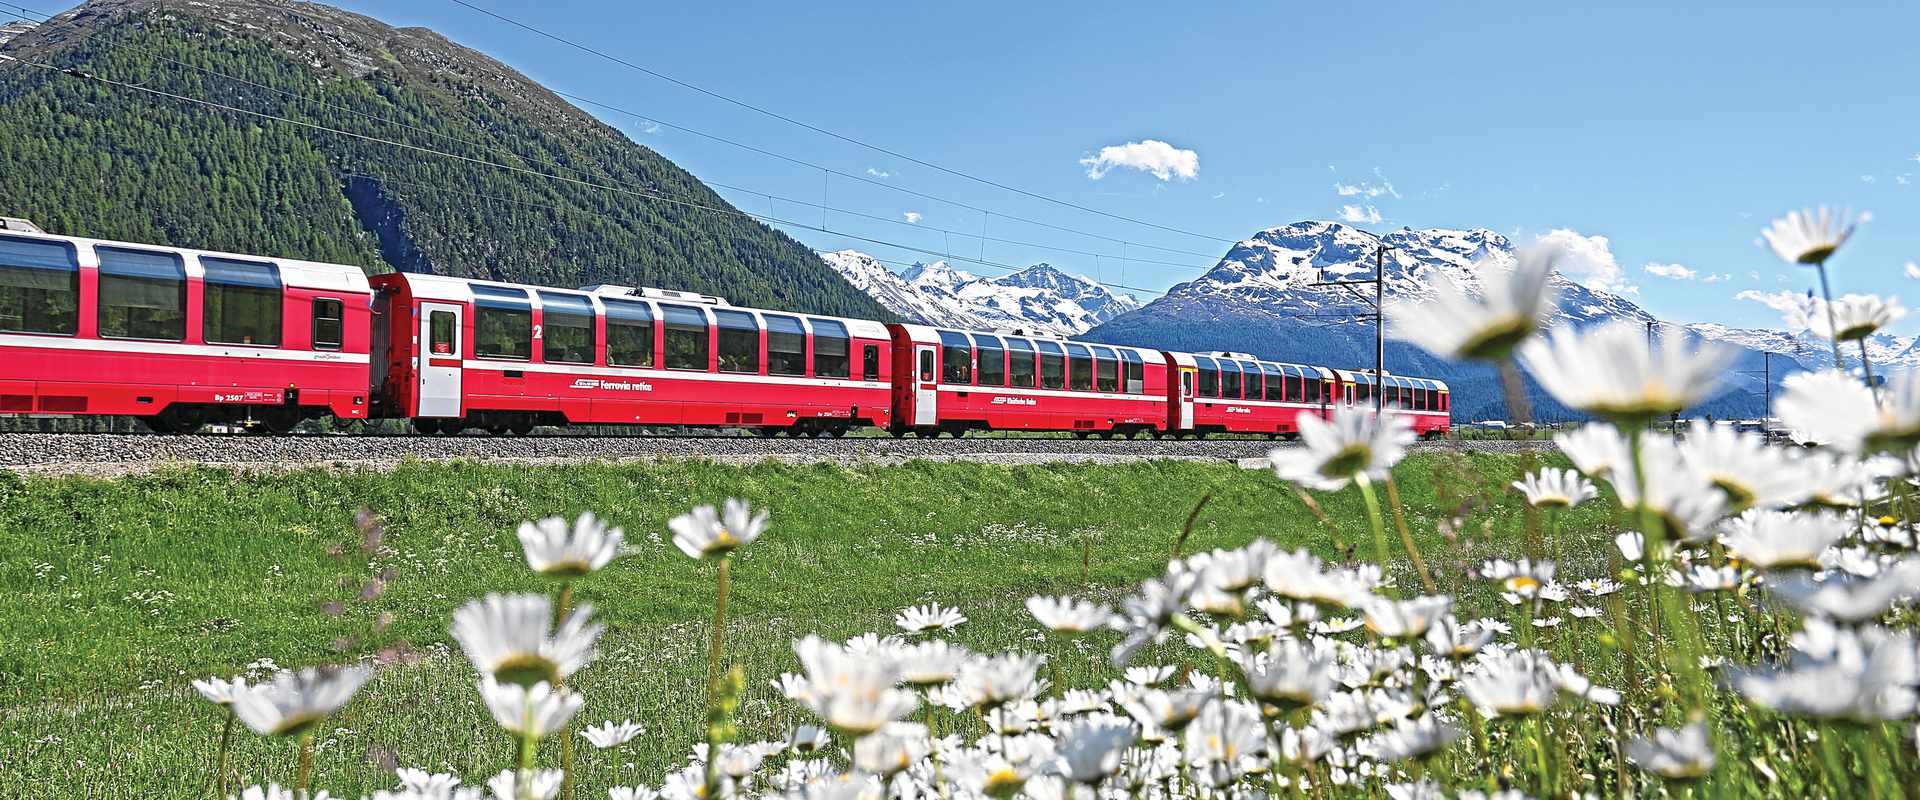 Training moving through a field with flowers in foreground, Switzerland